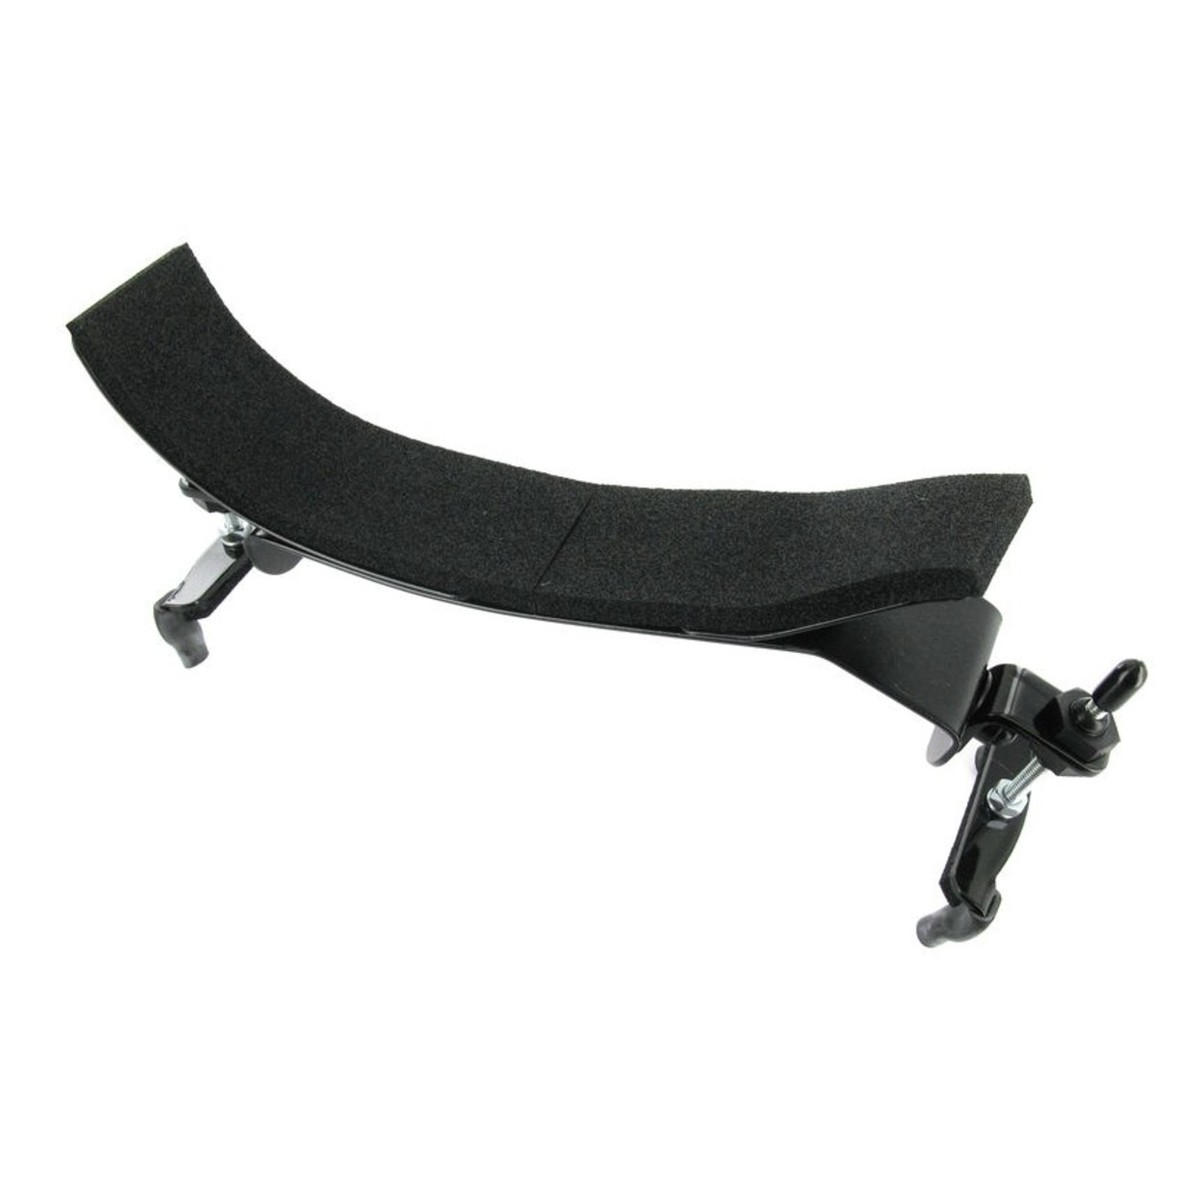 Bonmusica shoulder rest with foam pad in place